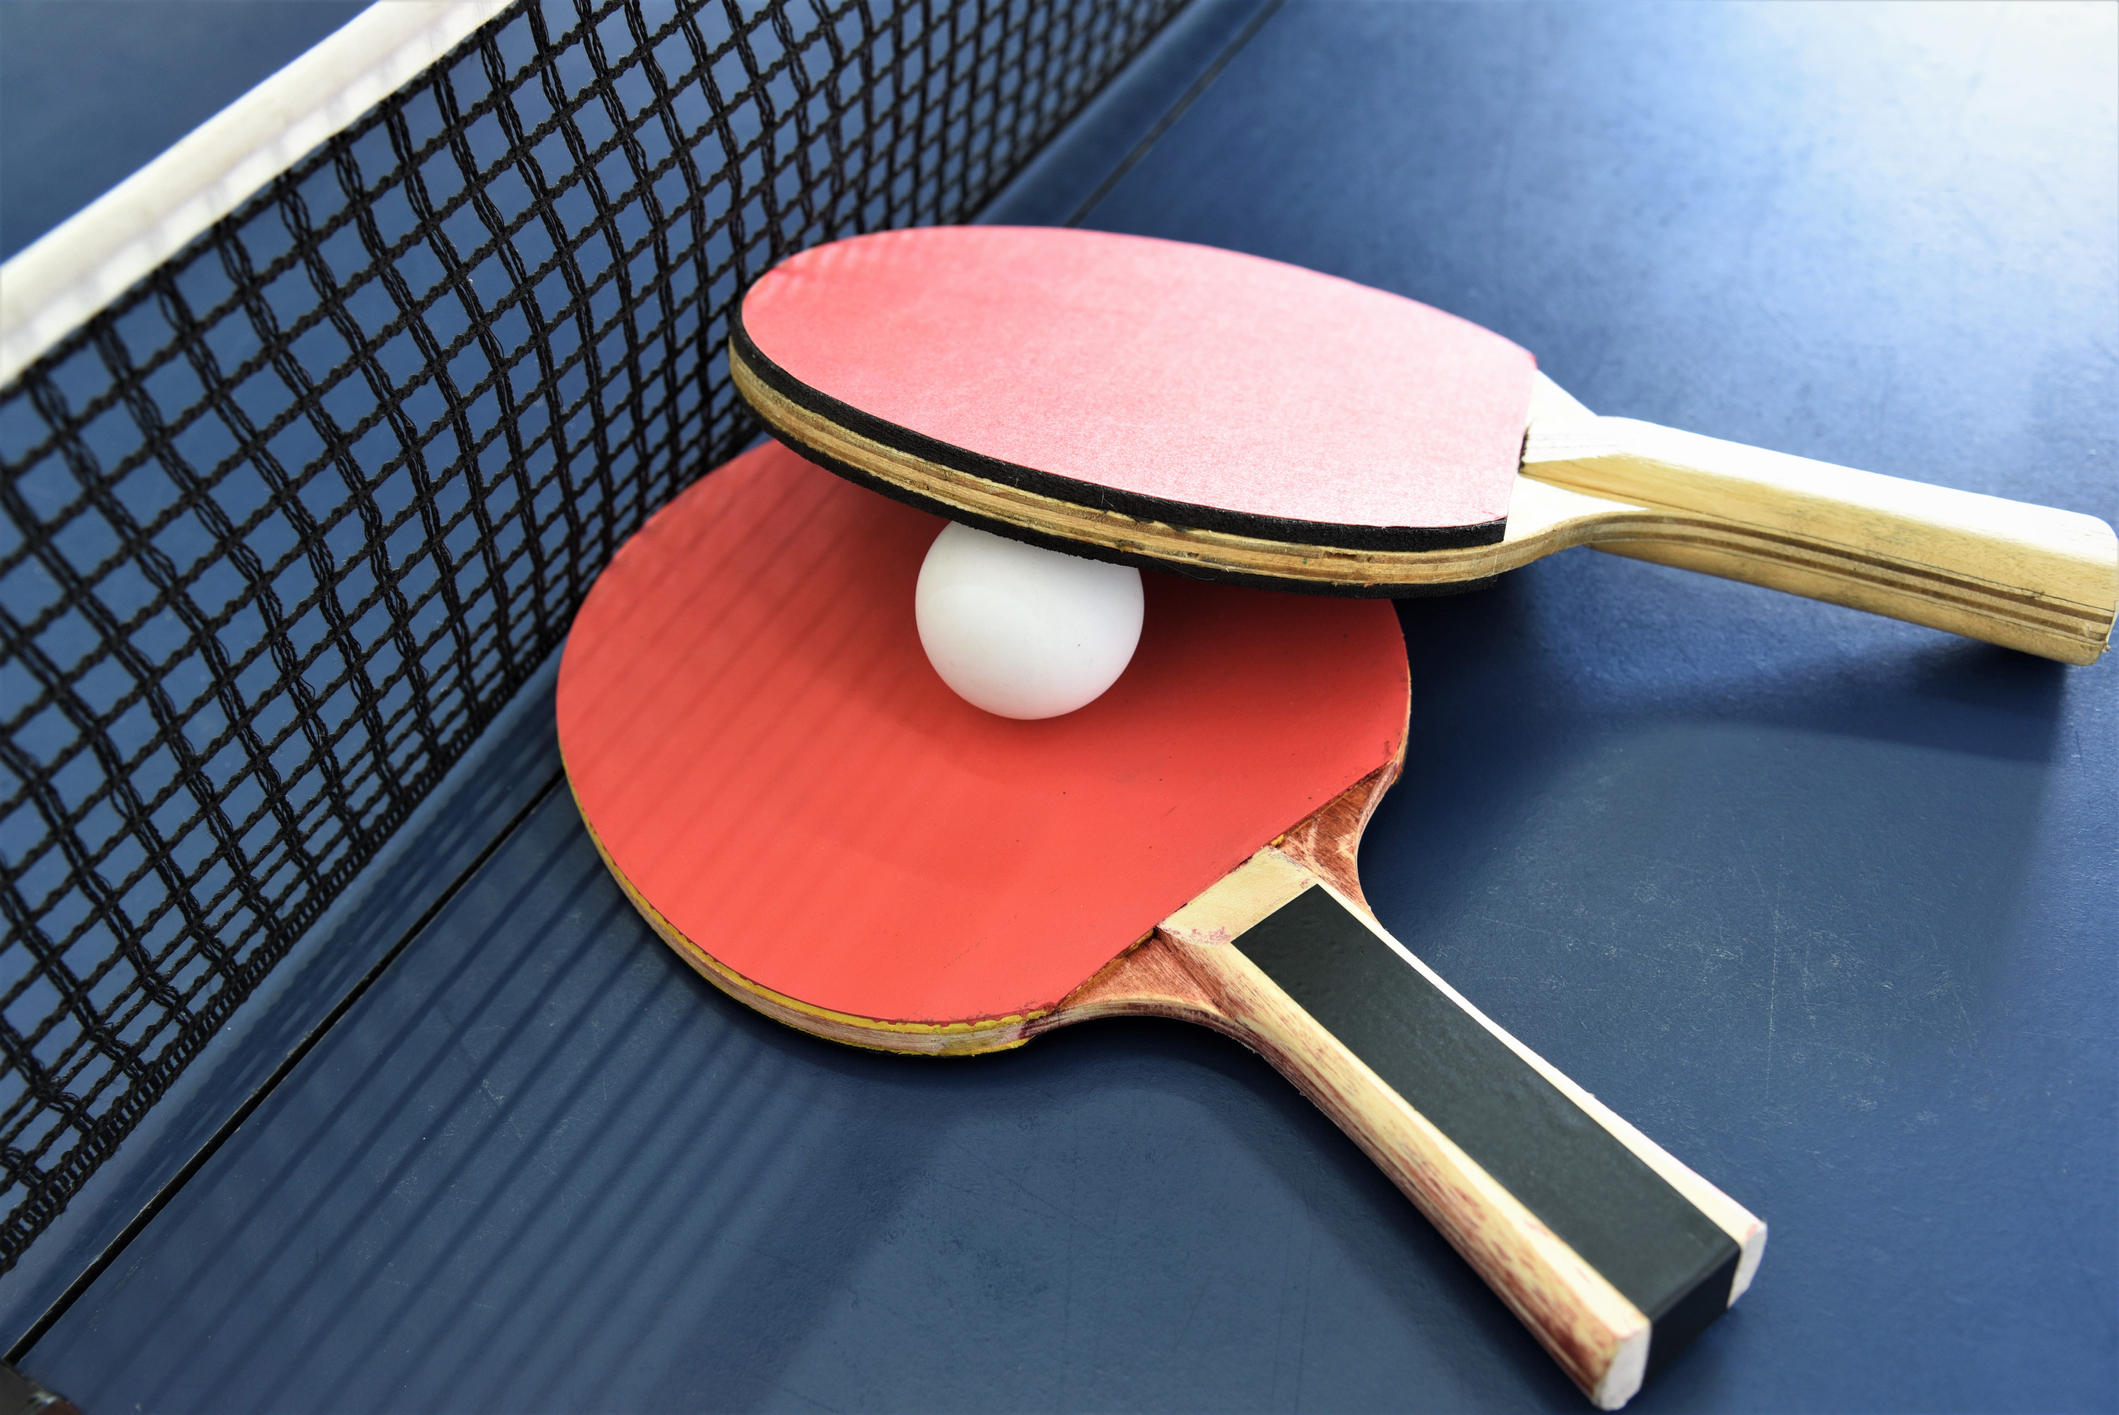 Ping Pong could be a good therapy for Parkinson's